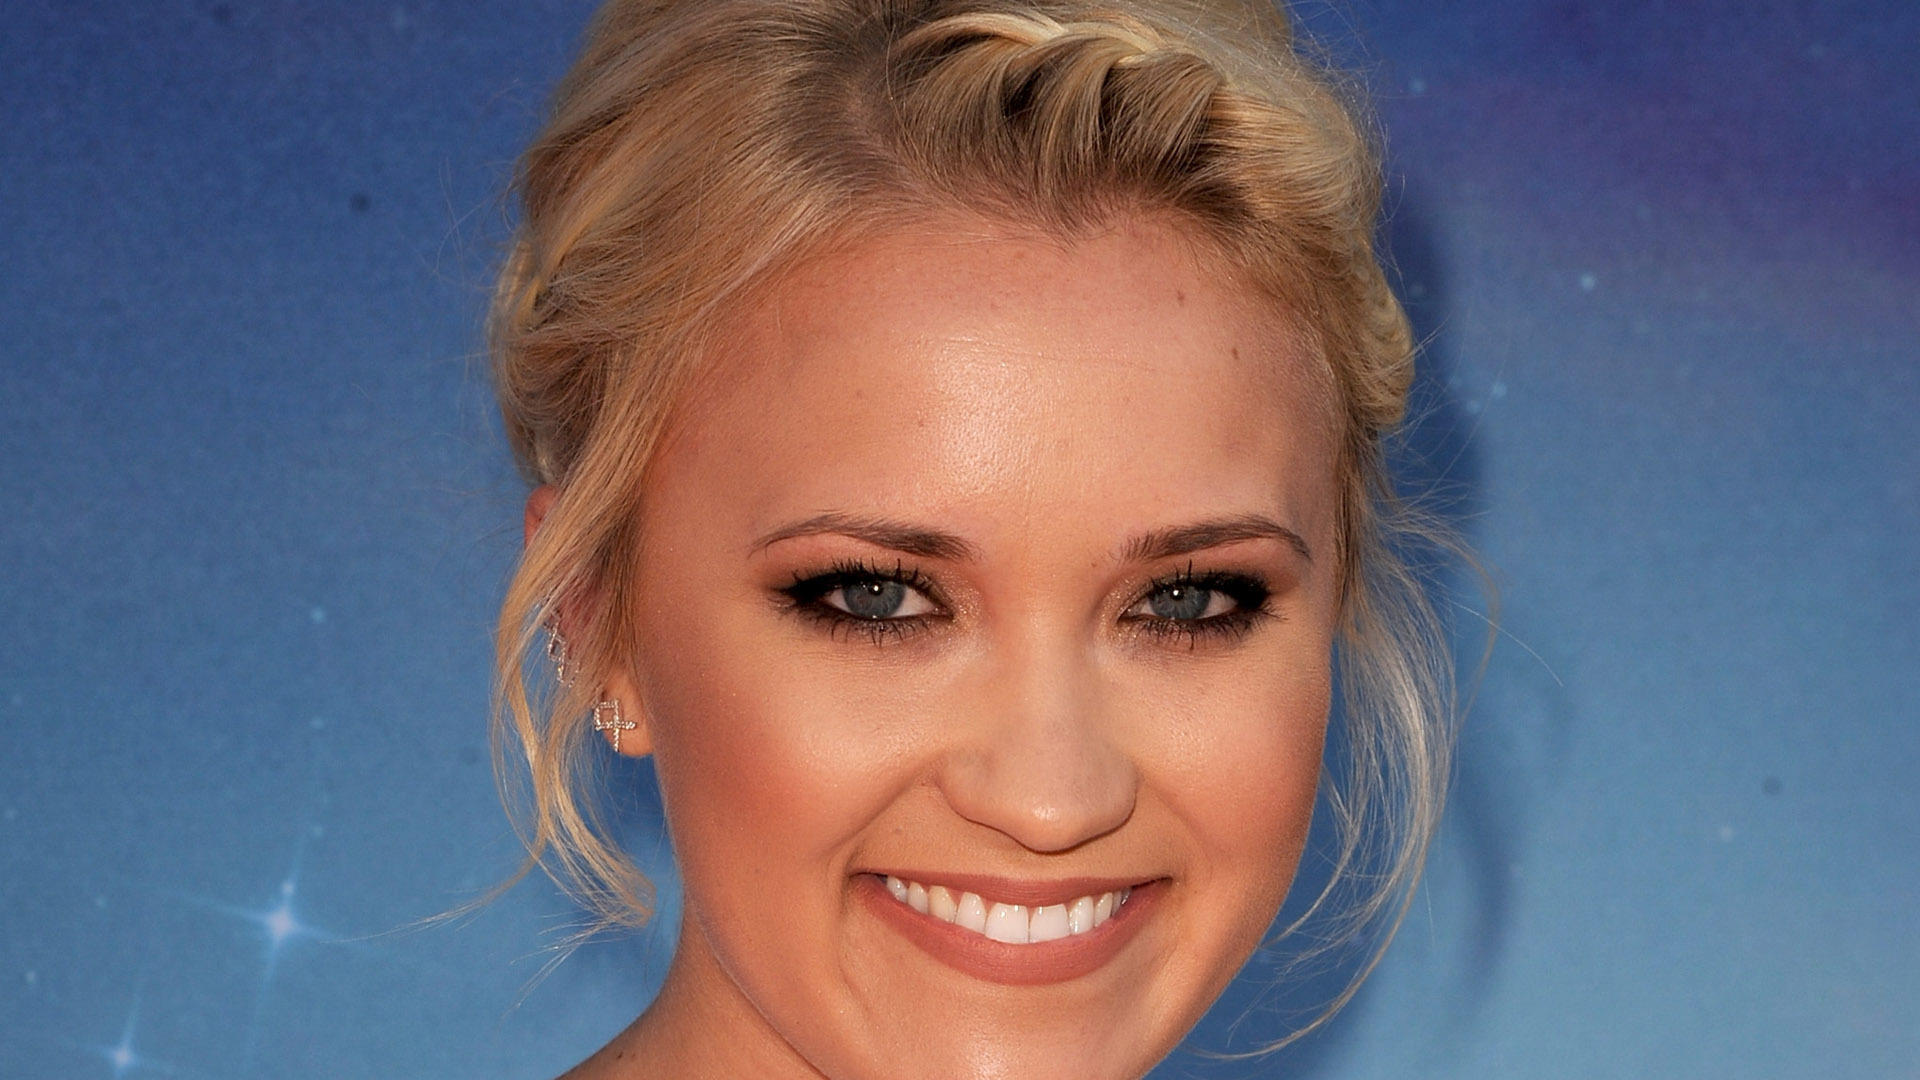 Emily Osment Wallpaper Image Photos Pictures Background